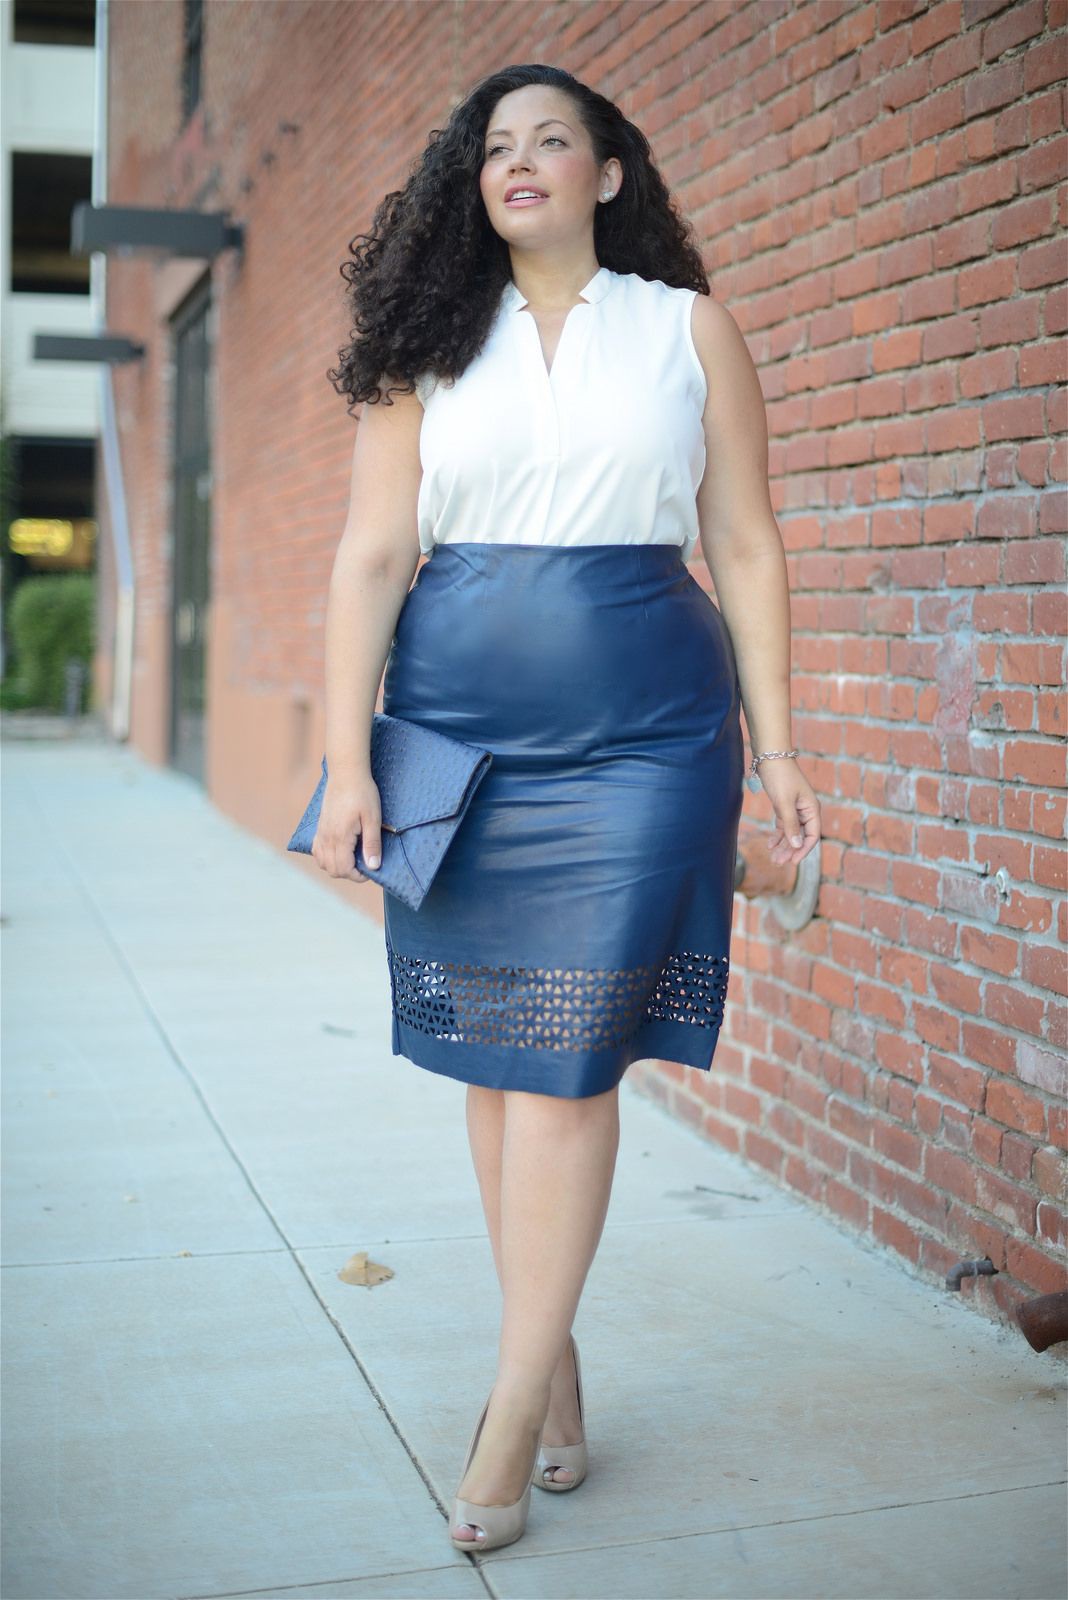 Professional Plus Size Leather Skirt Outfits: Leather Skirt Outfit,  Plus Size Skirt,  Plus-Size Leather Skirt,  Plus size outfit  